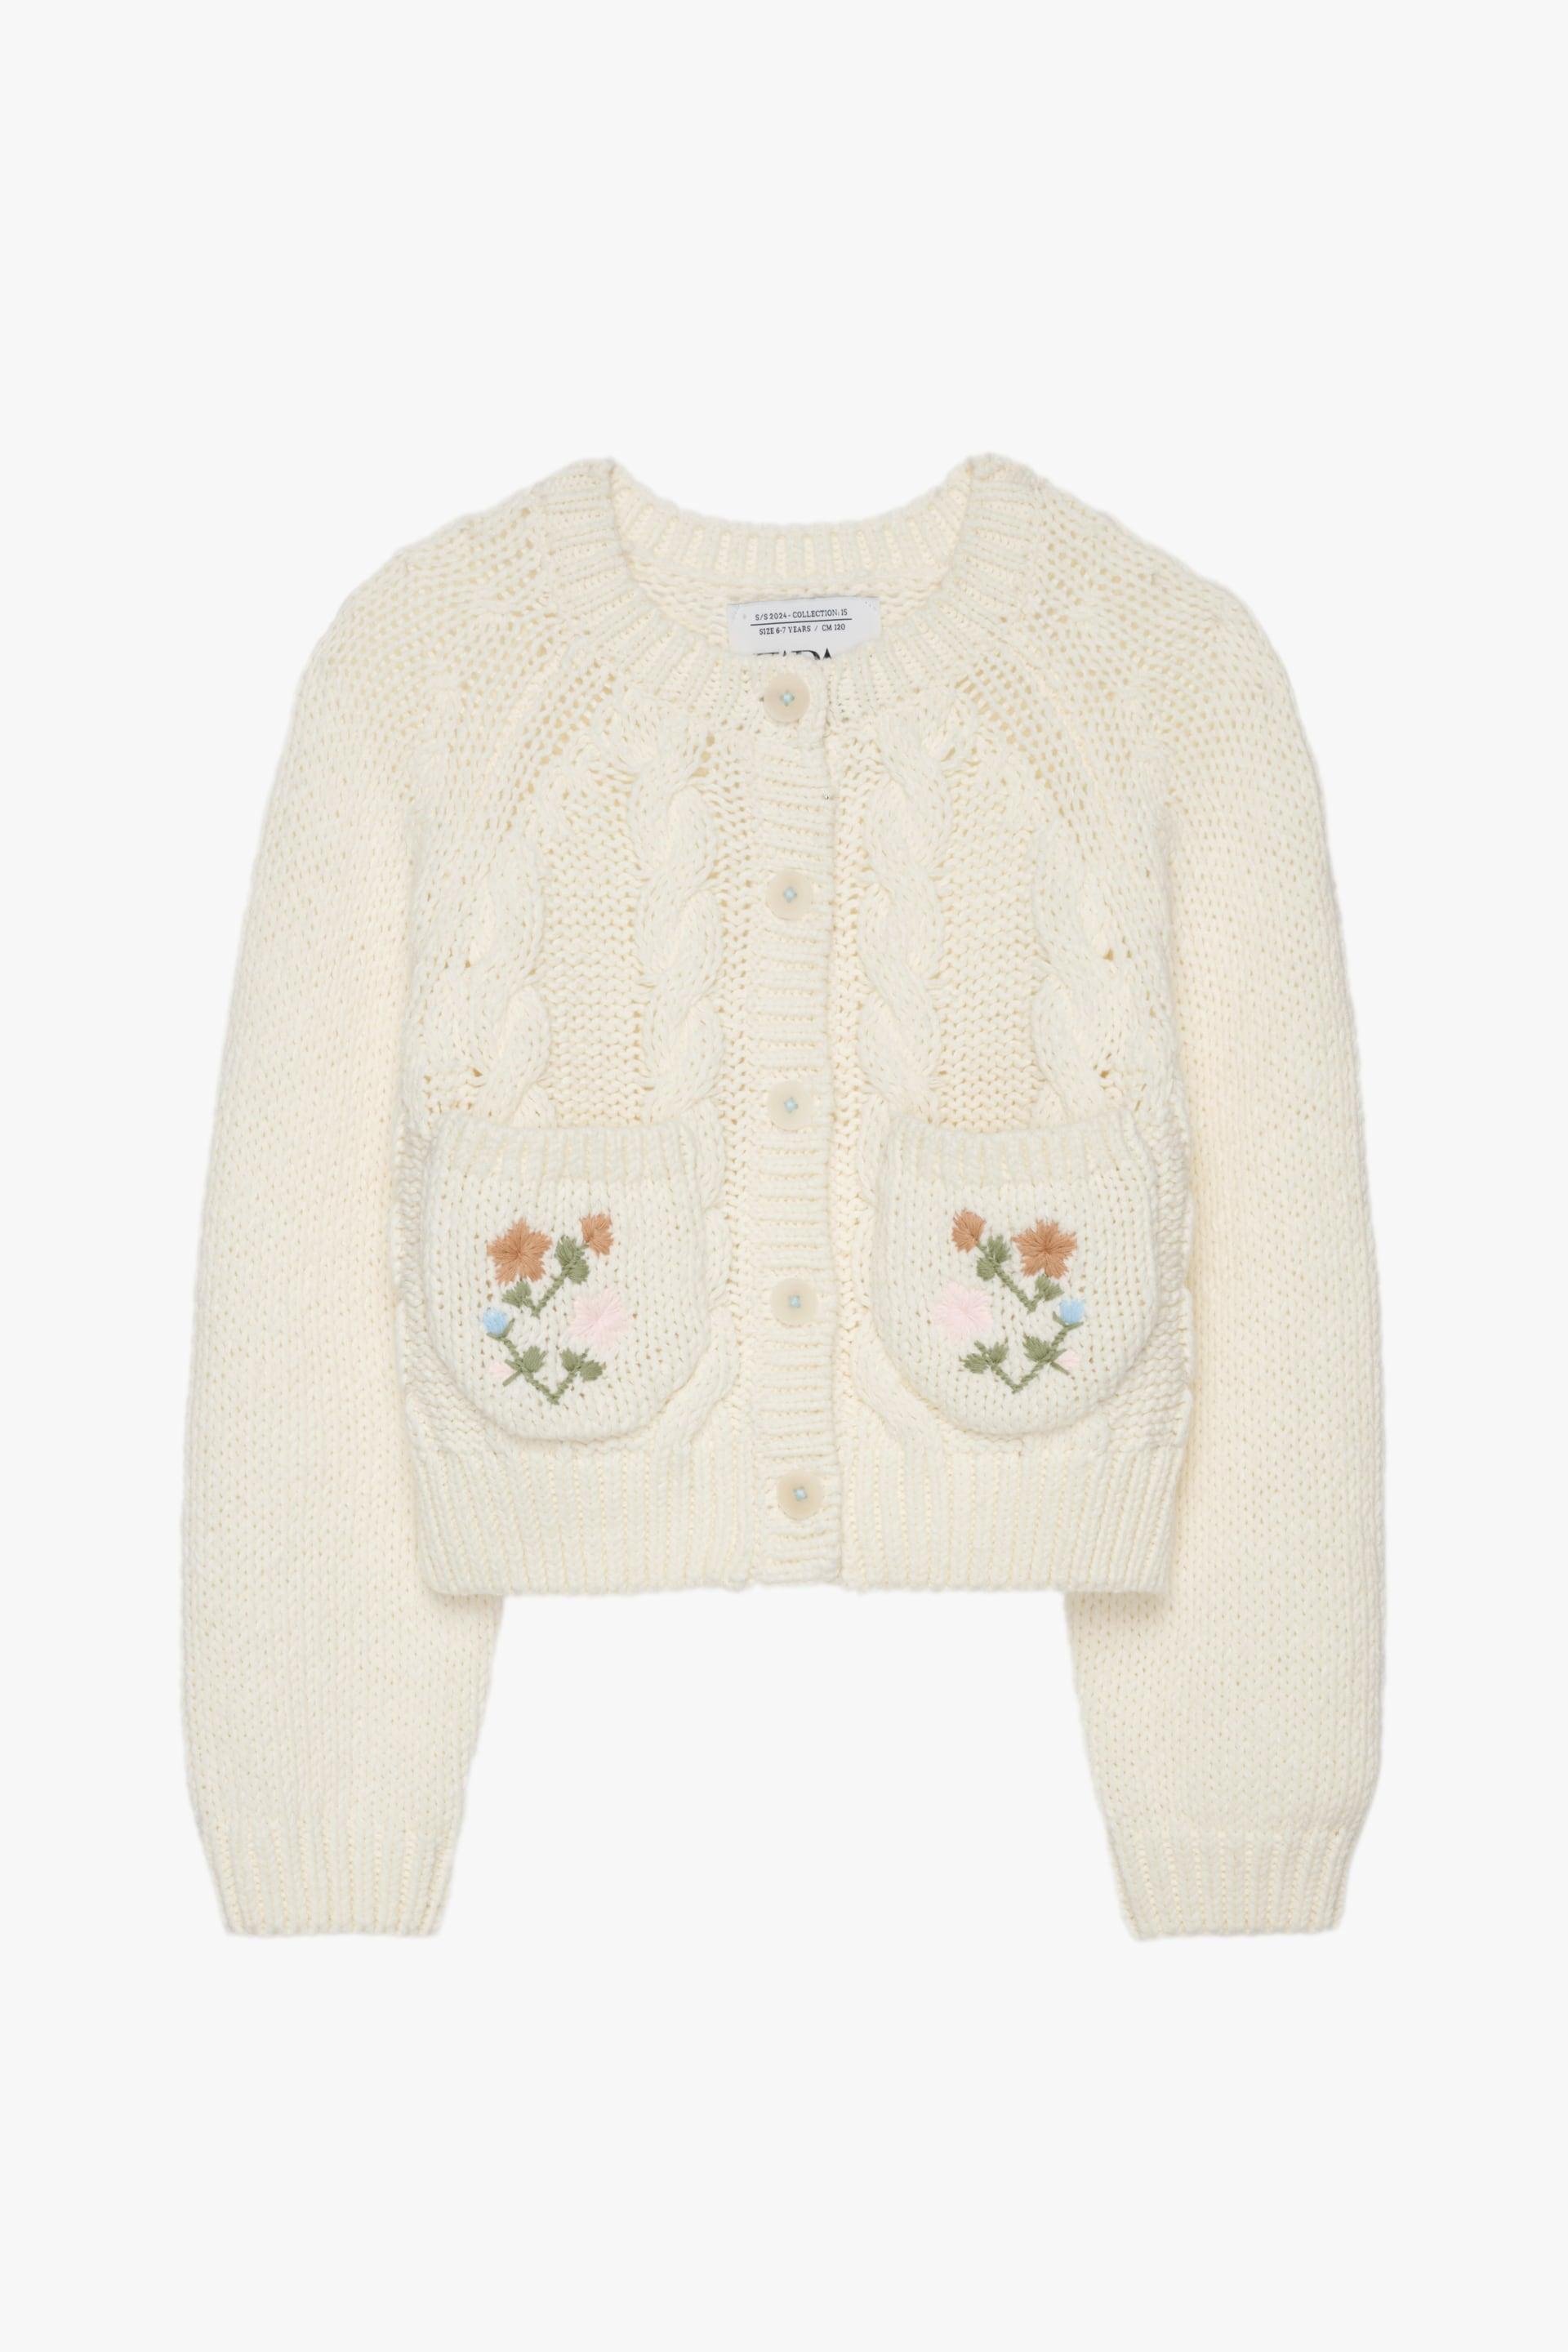 EMBROIDERED POCKET KNIT CARDIGAN LIMITED EDITION by ZARA